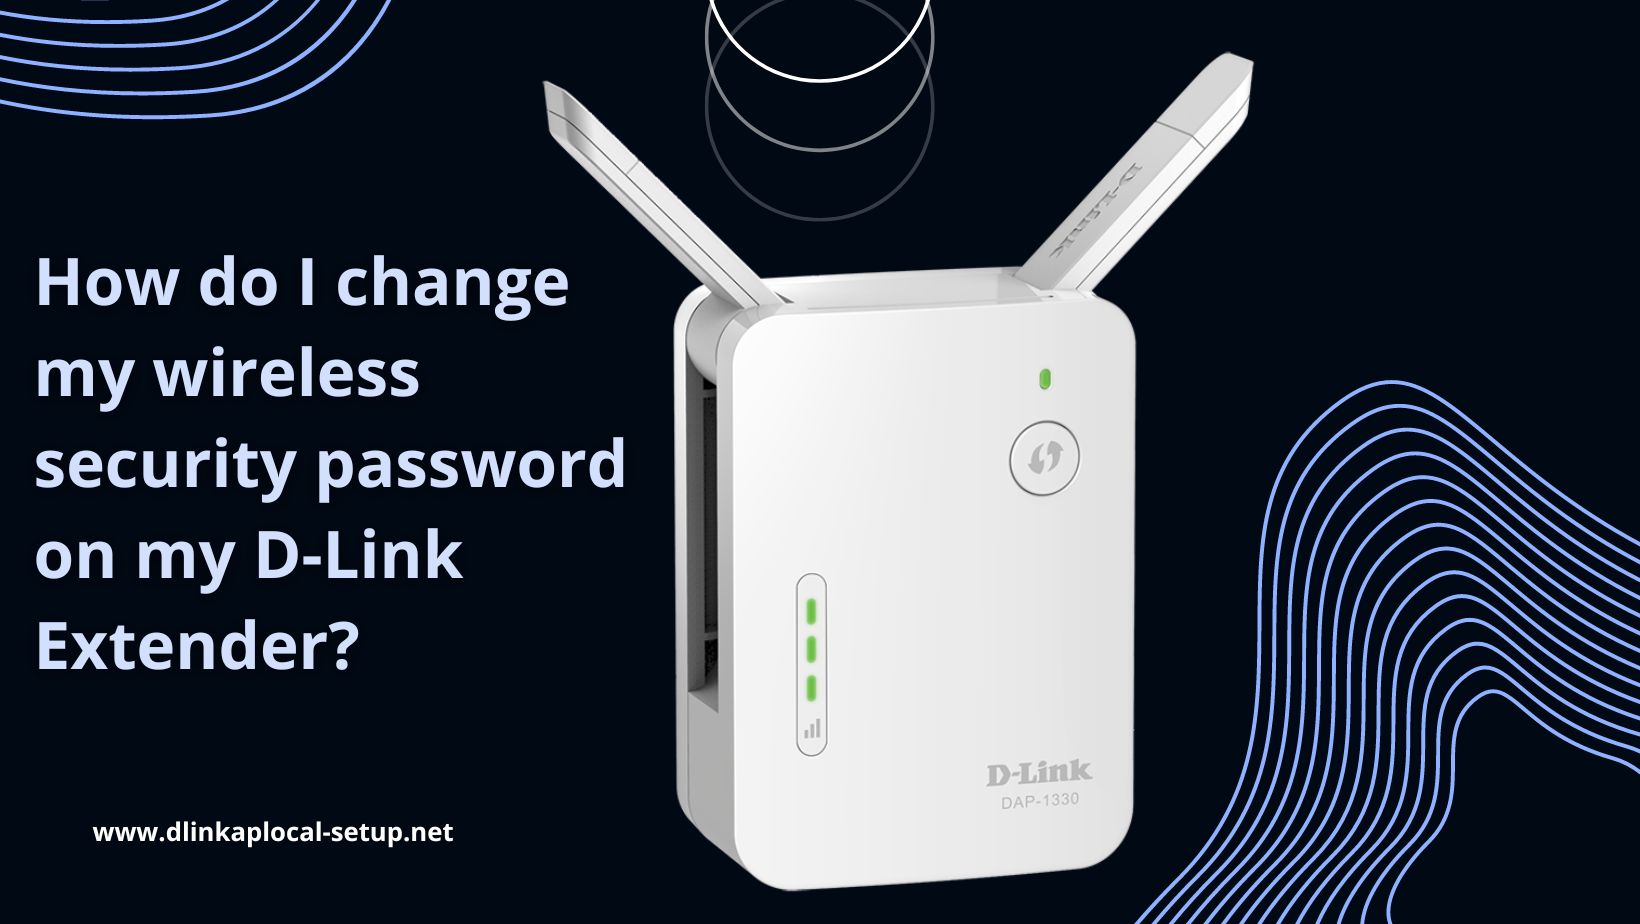 How do I change my wireless security password on my D-Link Extender